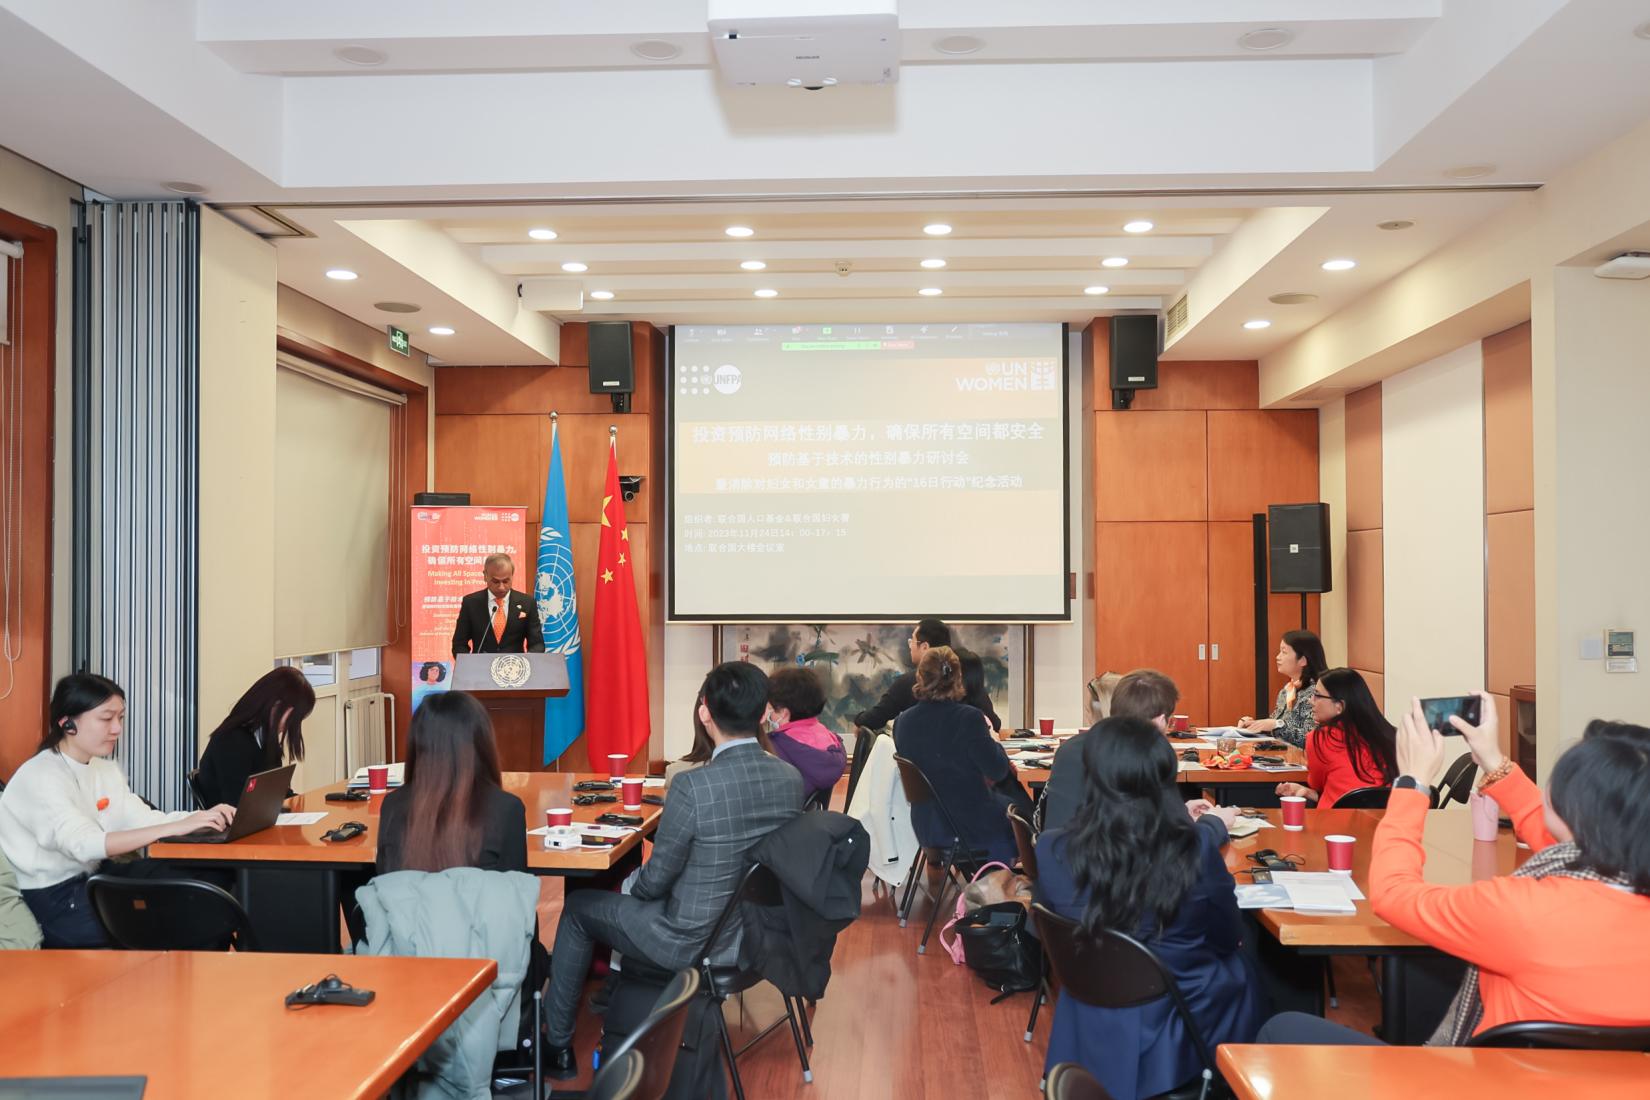 Seminar on Technology-facilitated Gender-based Violence and Commemoration of 16-days of Activism of Ending Violence against Women and Girls in China